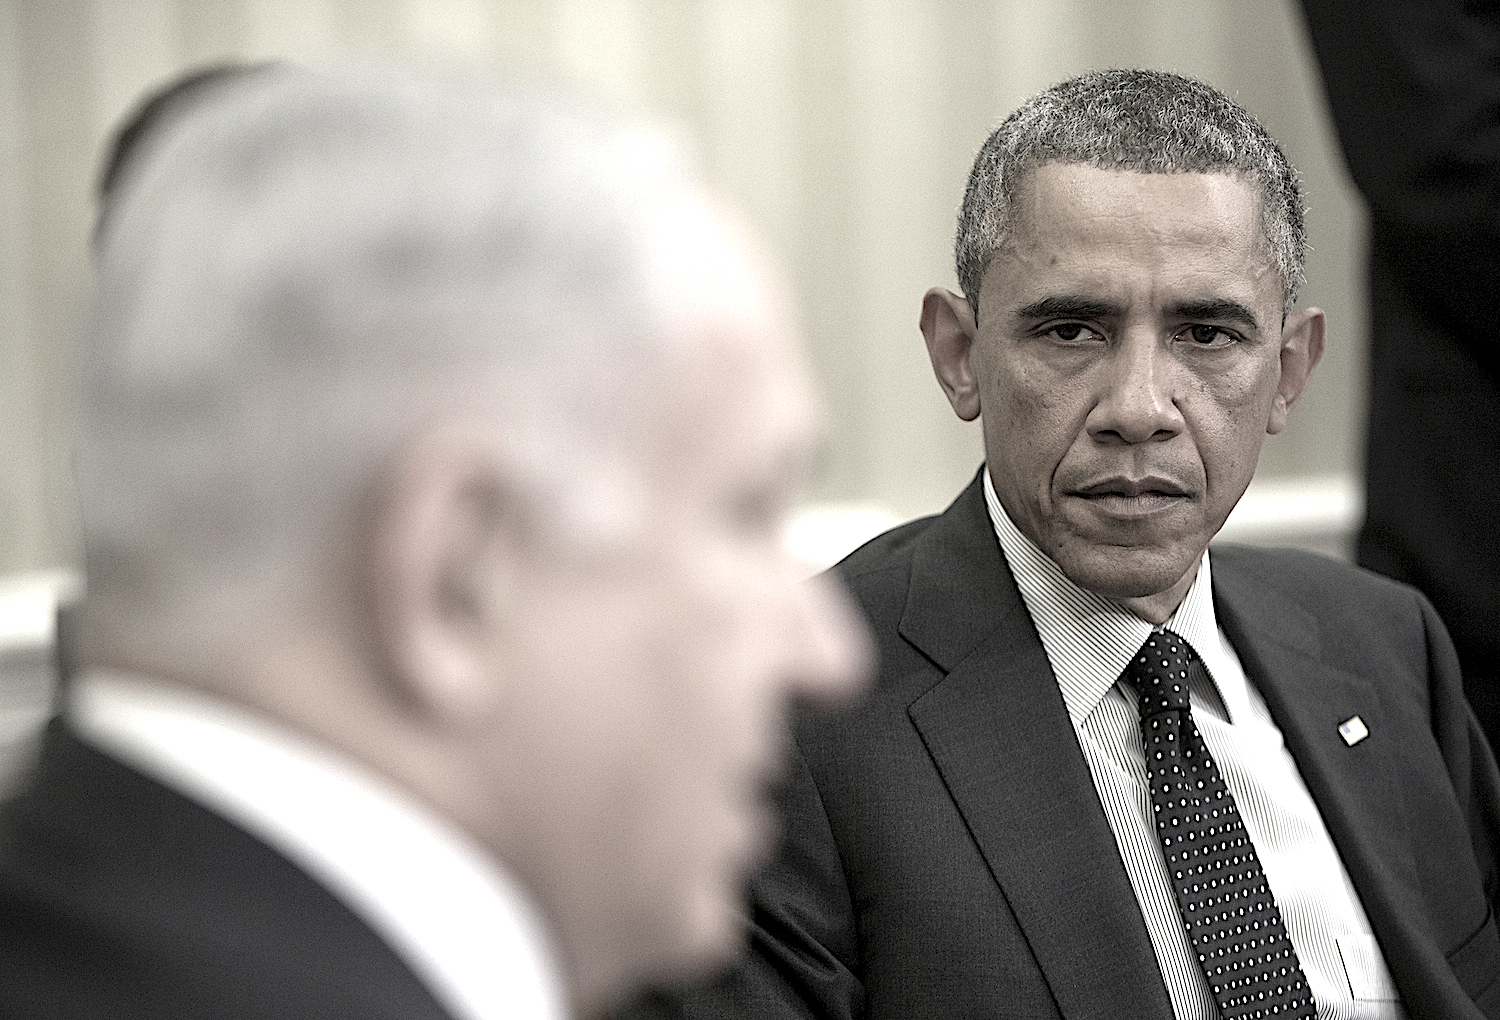 President Barack Obama listens as Israeli Prime Minister Benjamin Netanyahu speaks during their meeting in the Oval Office of the White House in Washington, Wednesday, Oct. 1, 2014. President Barack Obama and Israeli Prime Minister Benjamin Netanyahu met for the first time since a rash of civilian casualties during Israel's summer war with Hamas heightened tensions between two leaders who have long had a prickly relationship. (AP Photo/Pablo Martinez Monsivais)